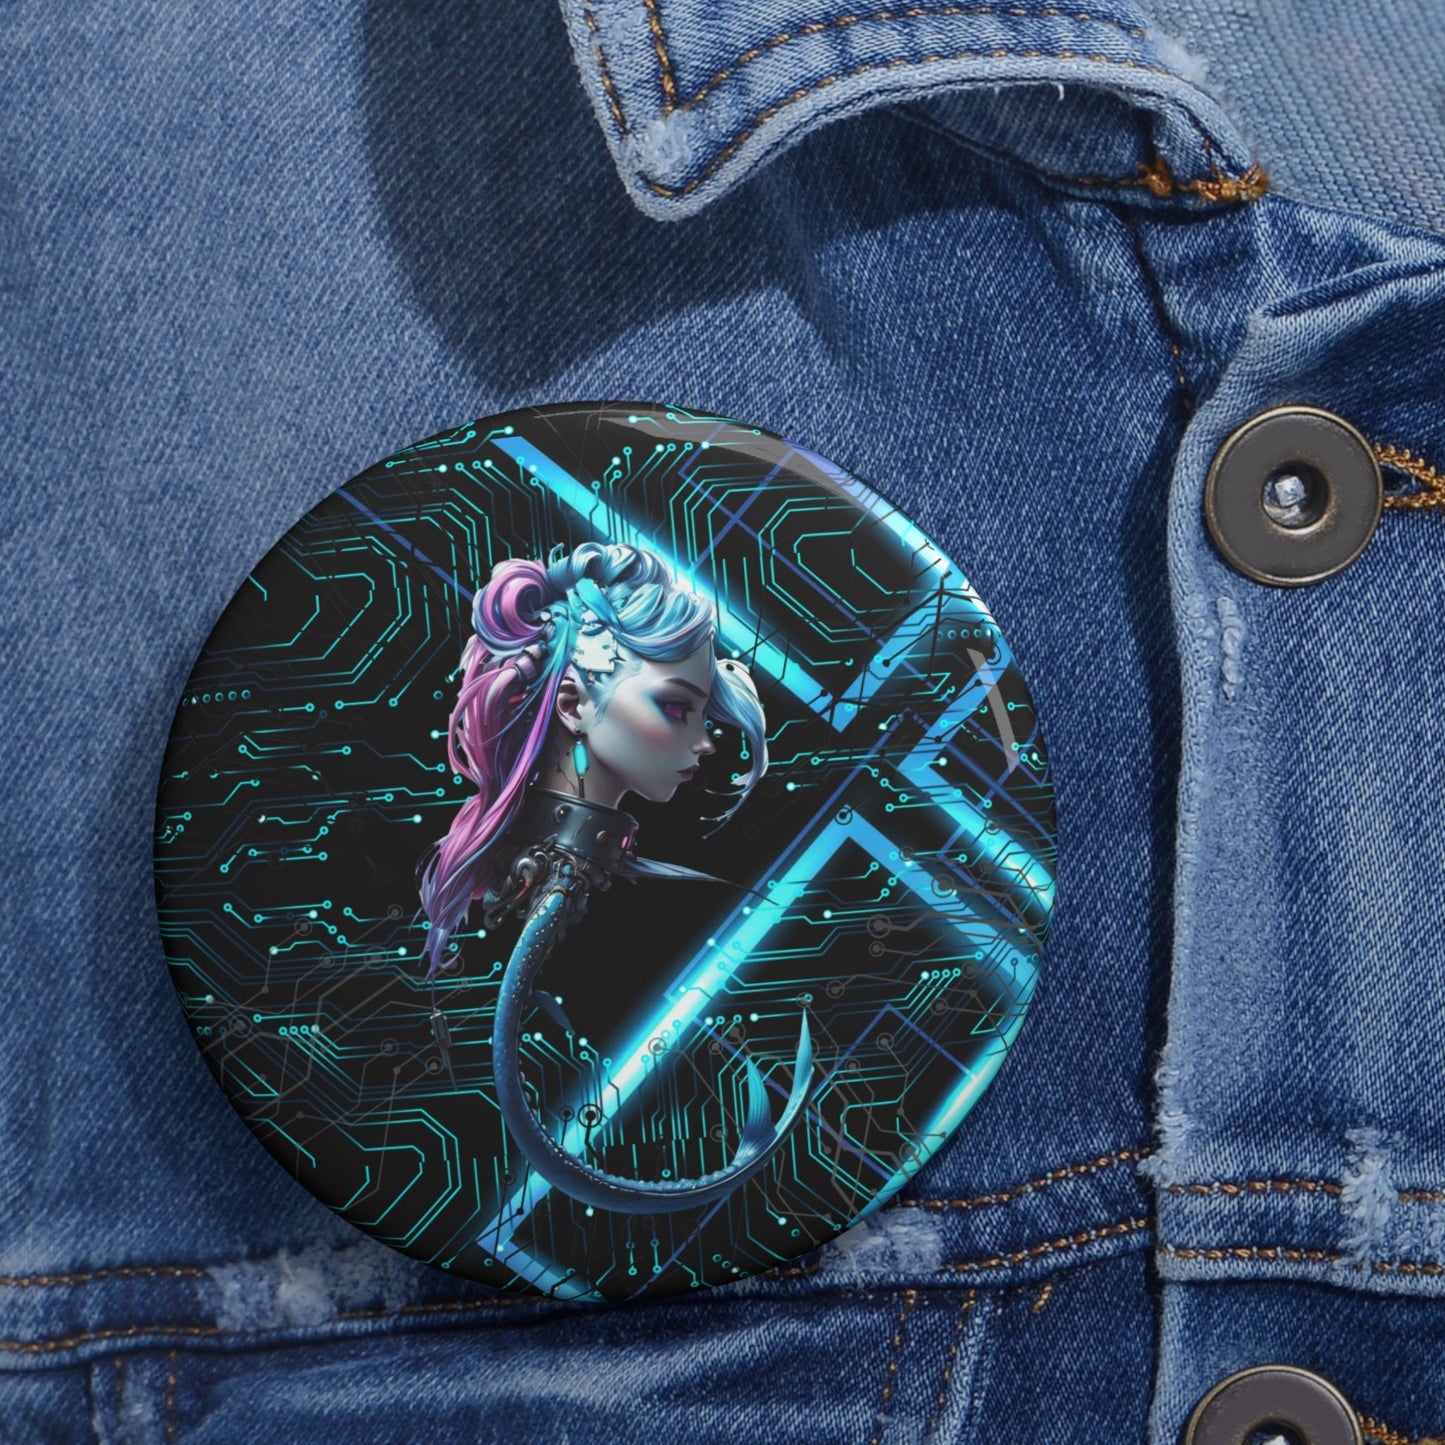 Stand out  with the  Cyber freak Pin Buttons  available at Hey Nugget. Grab yours today!